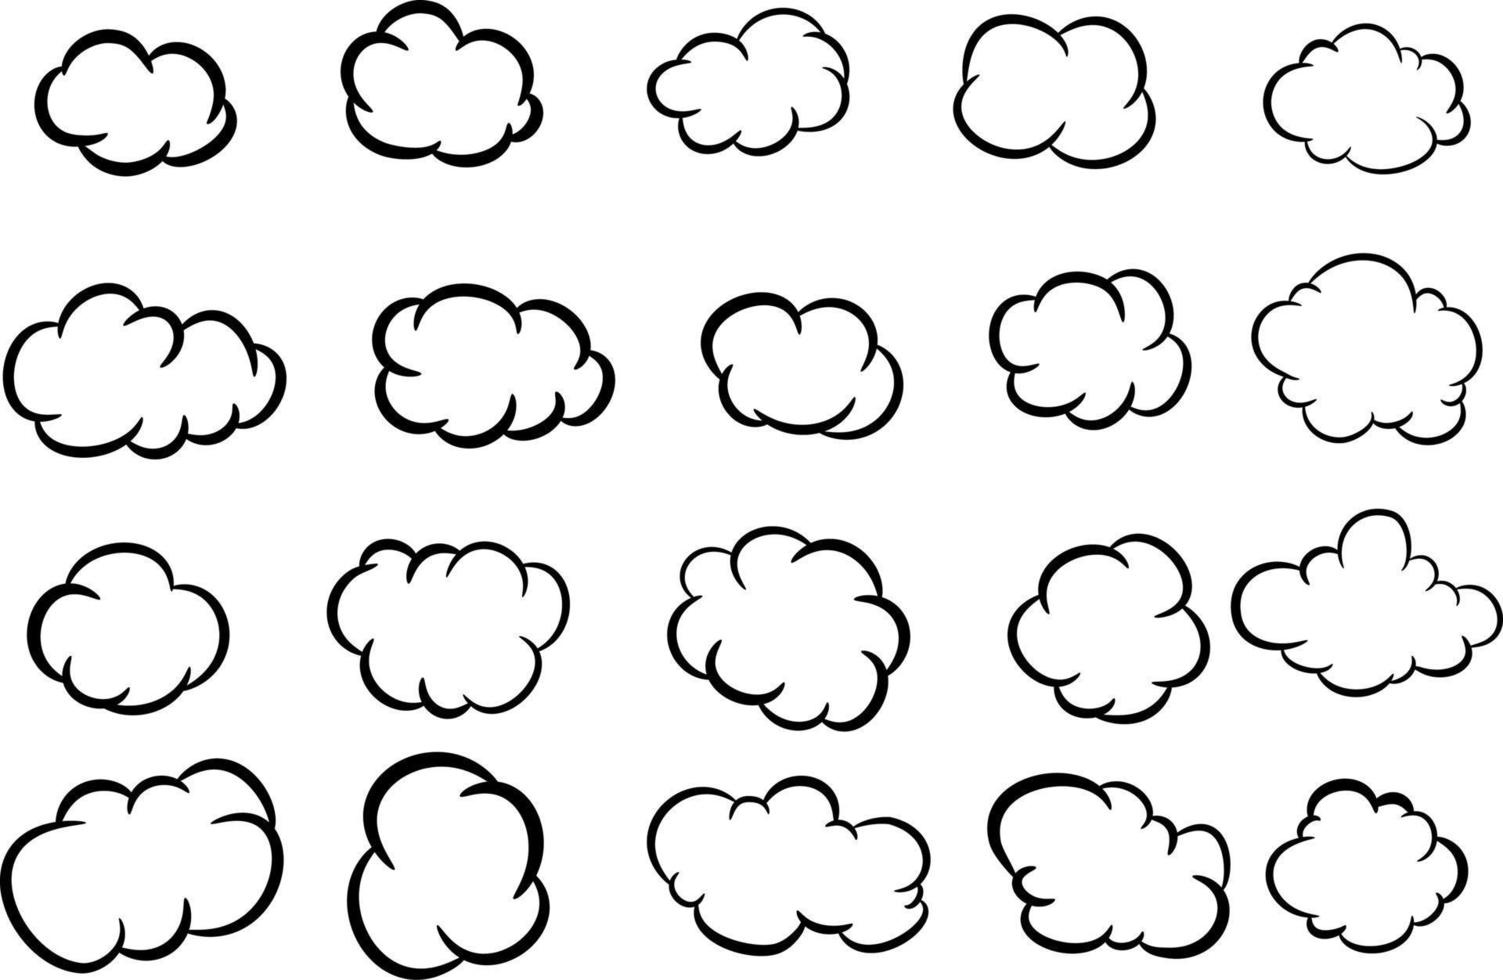 Hand drawn collection of clouds. Vector Illustration